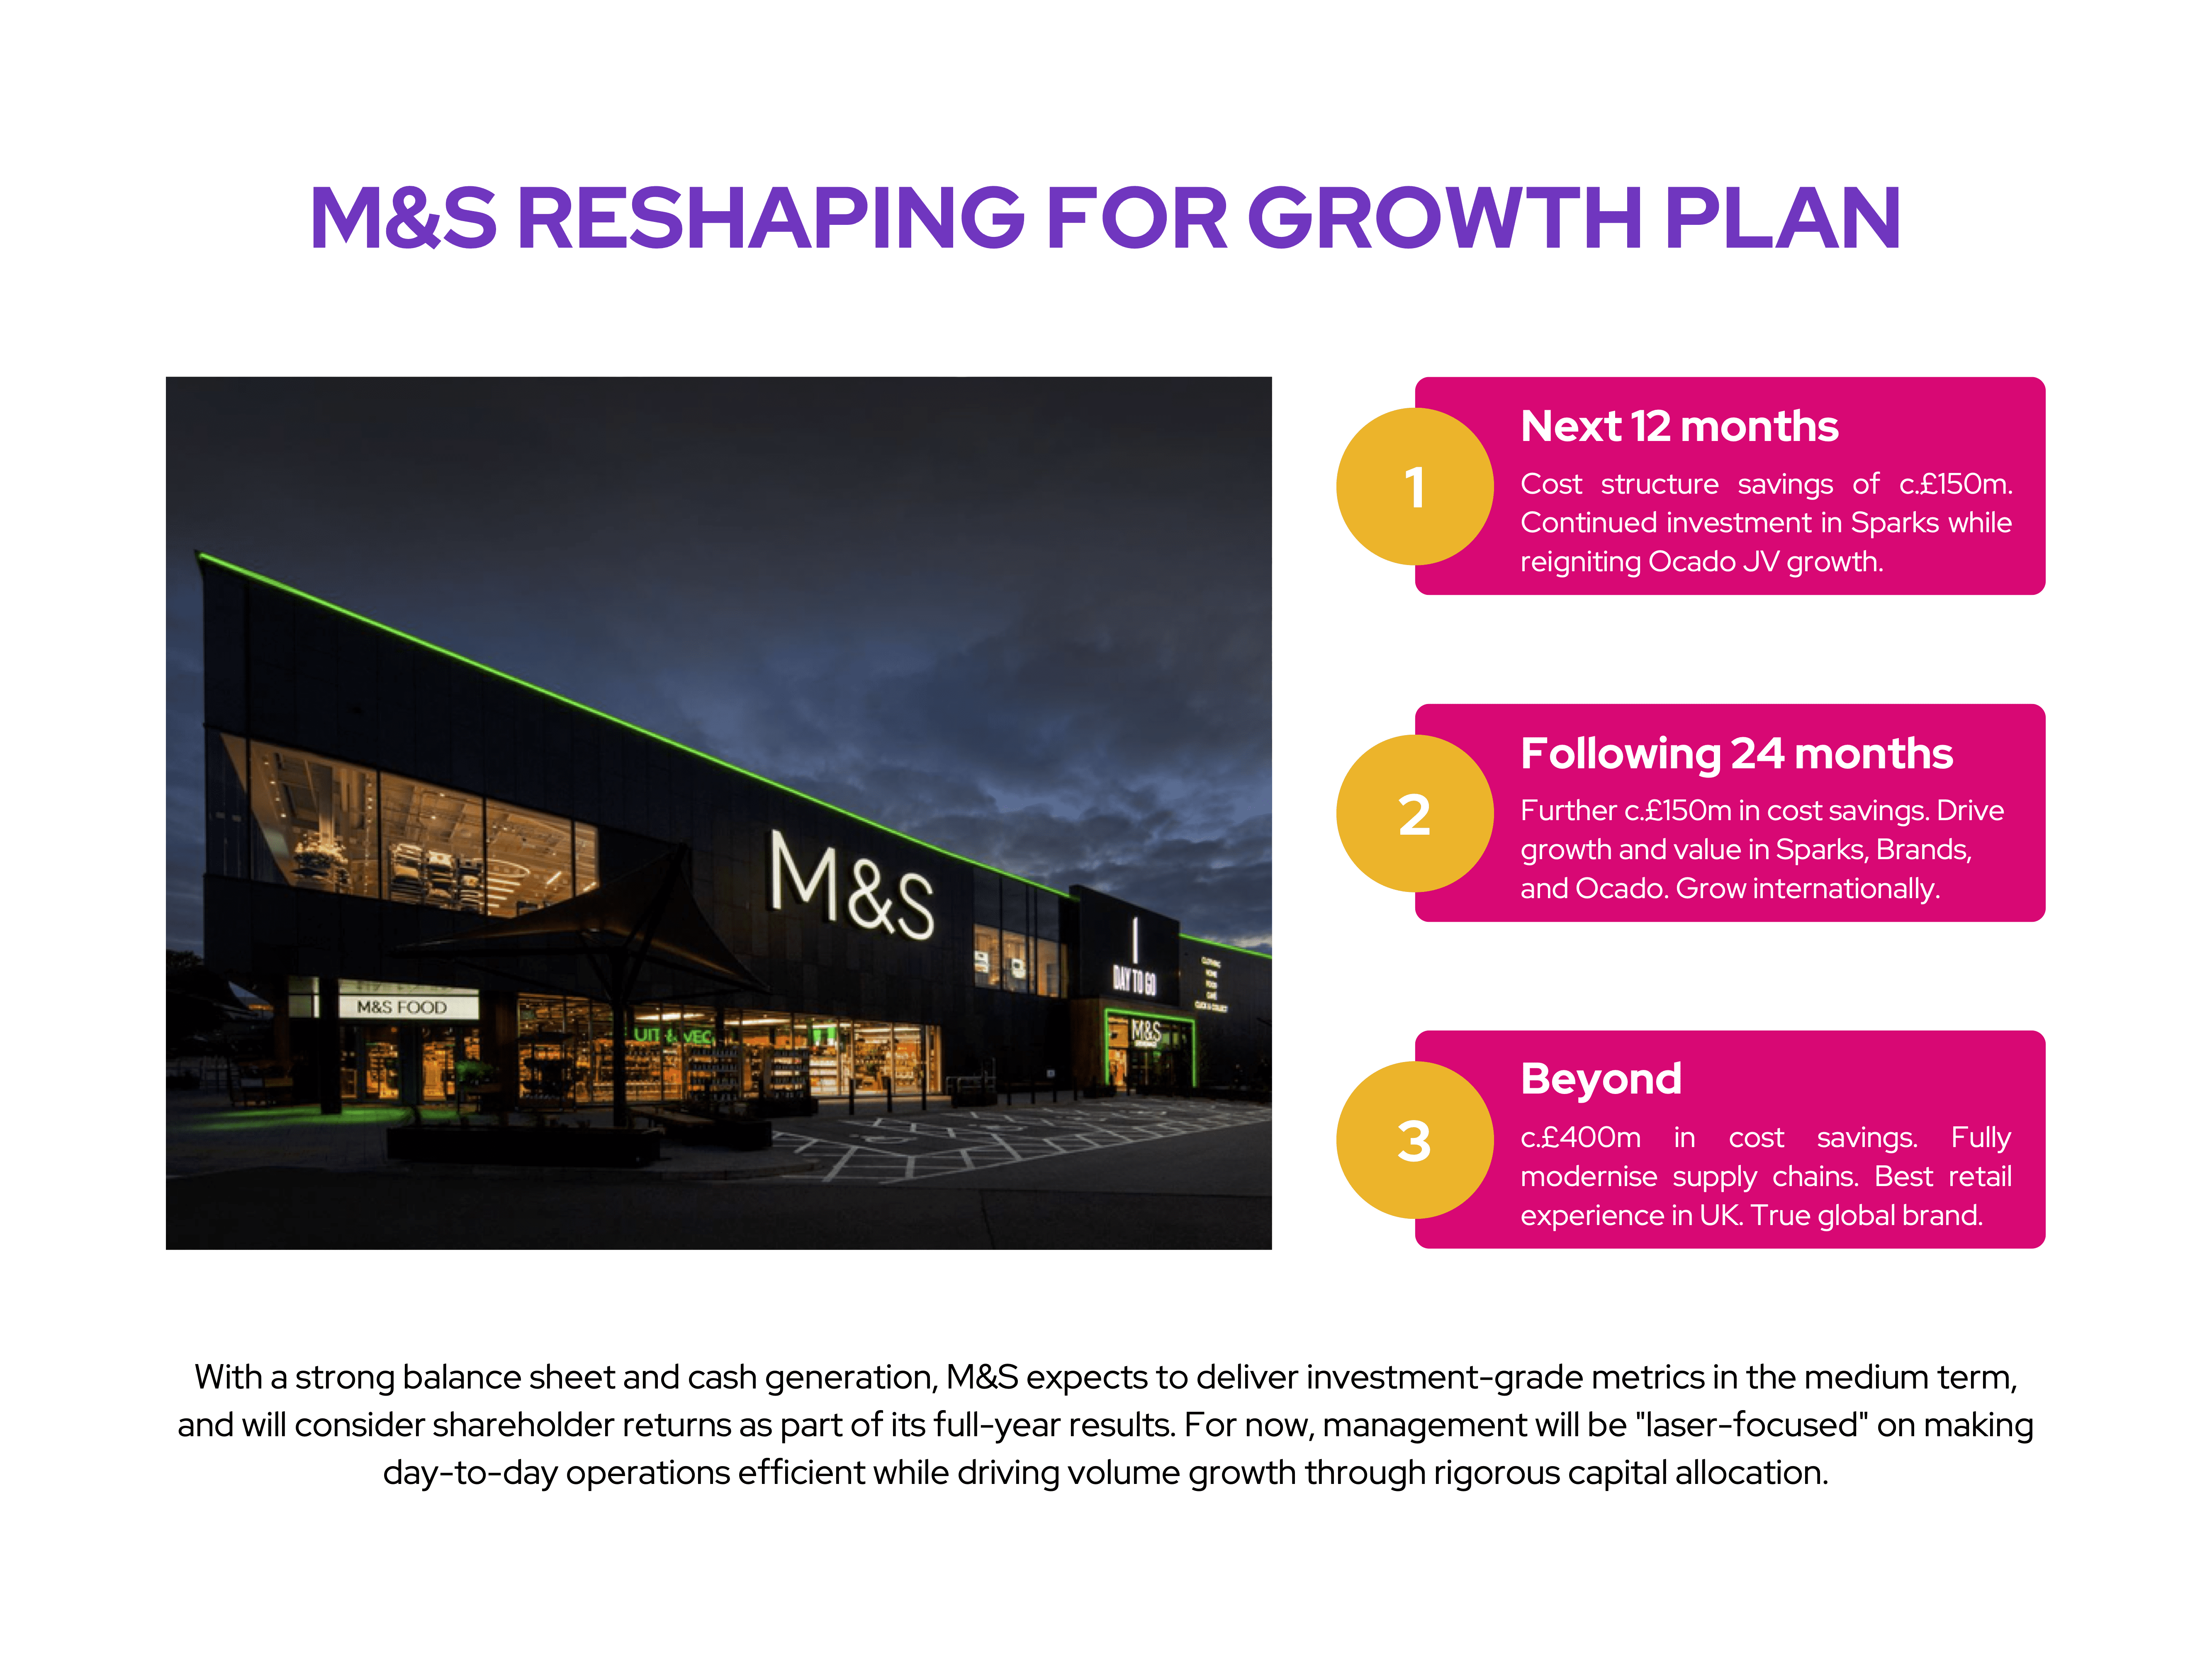 Marks & Spencer plans to grow high street brand offer to compete